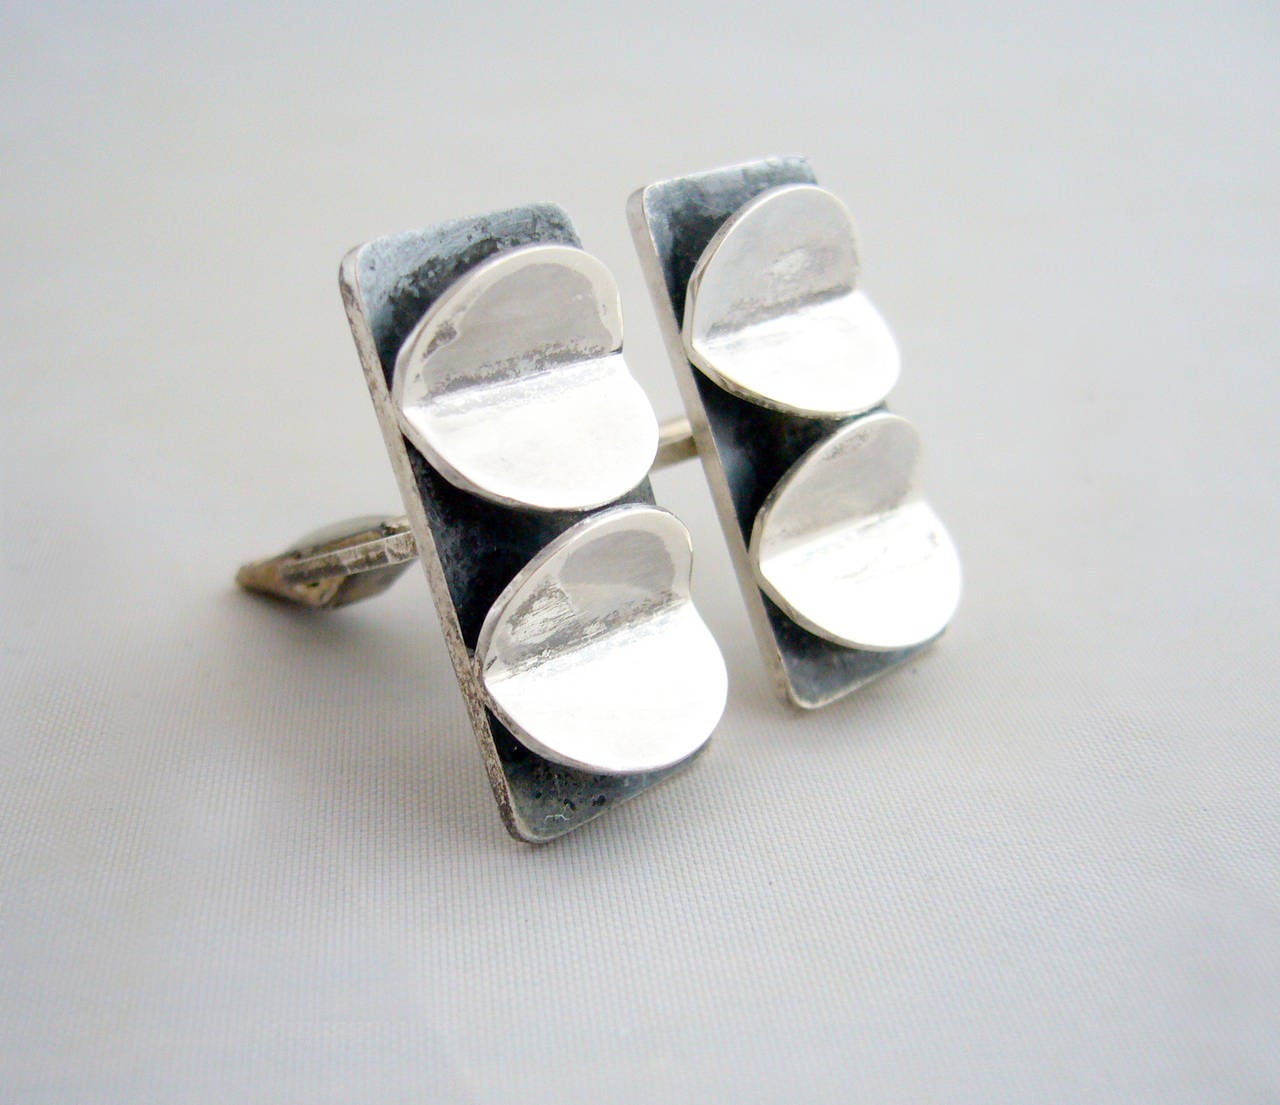 Sculptural sterling silver mid-century American modern cufflinks signed with an unknown hallmark of a hand scribed 